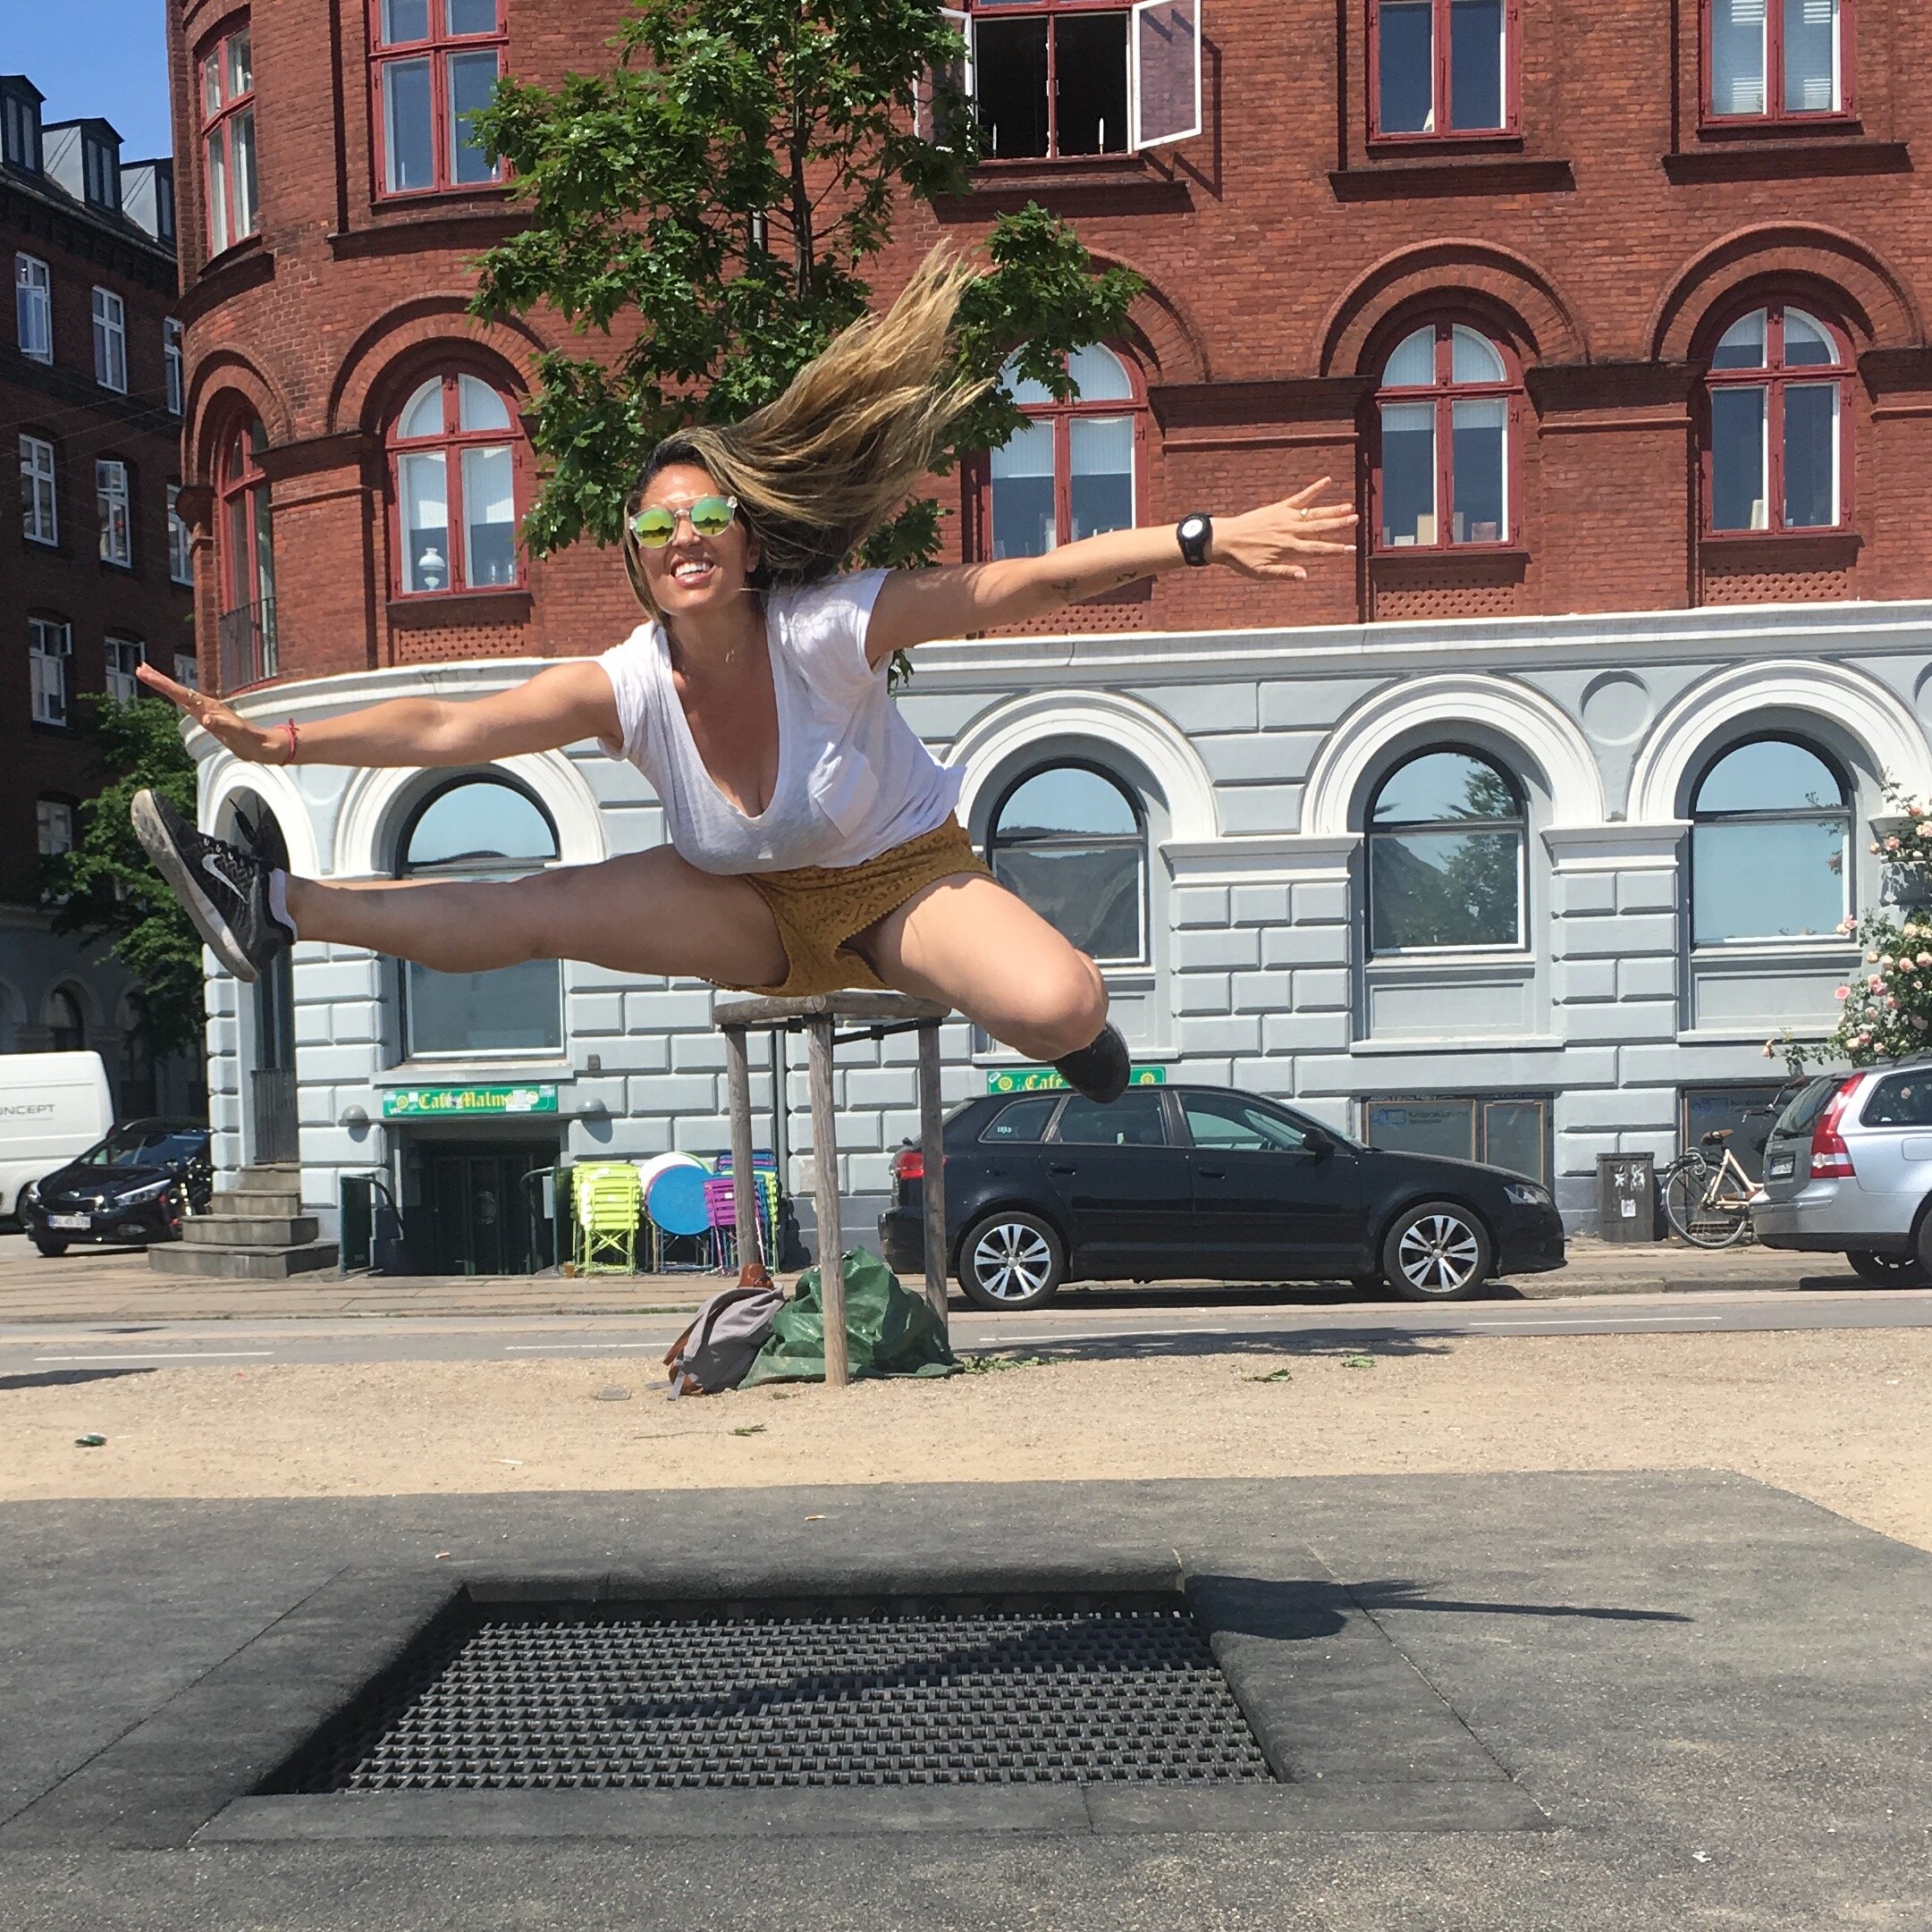 the city has public trampolines!